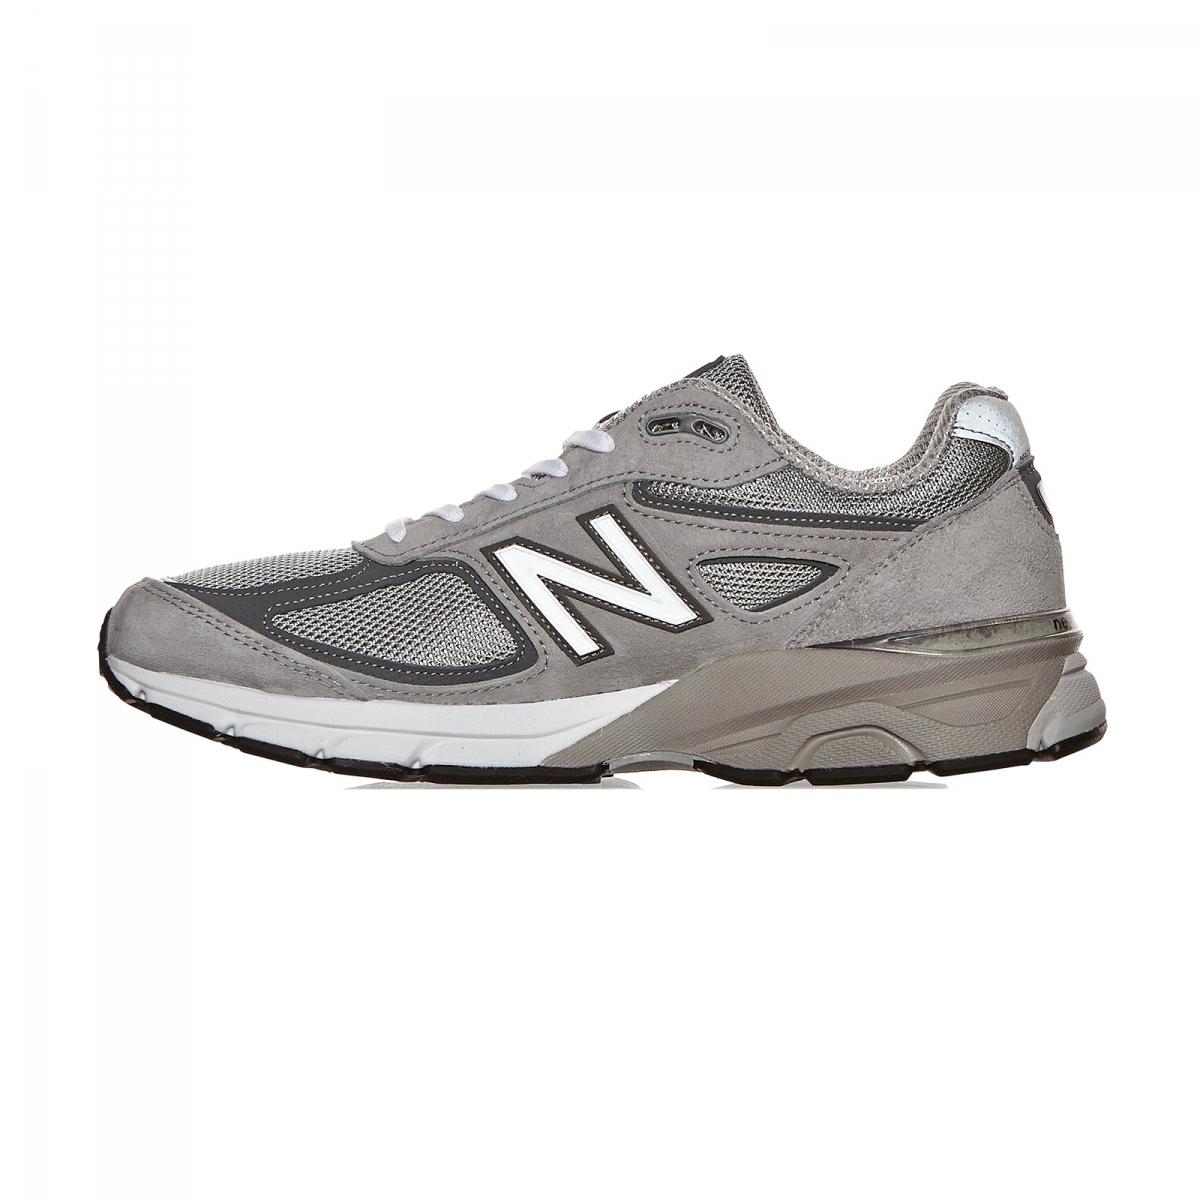 New Balance M 990 Gl4 Sneakers in Grey (Grey) for Men - Lyst